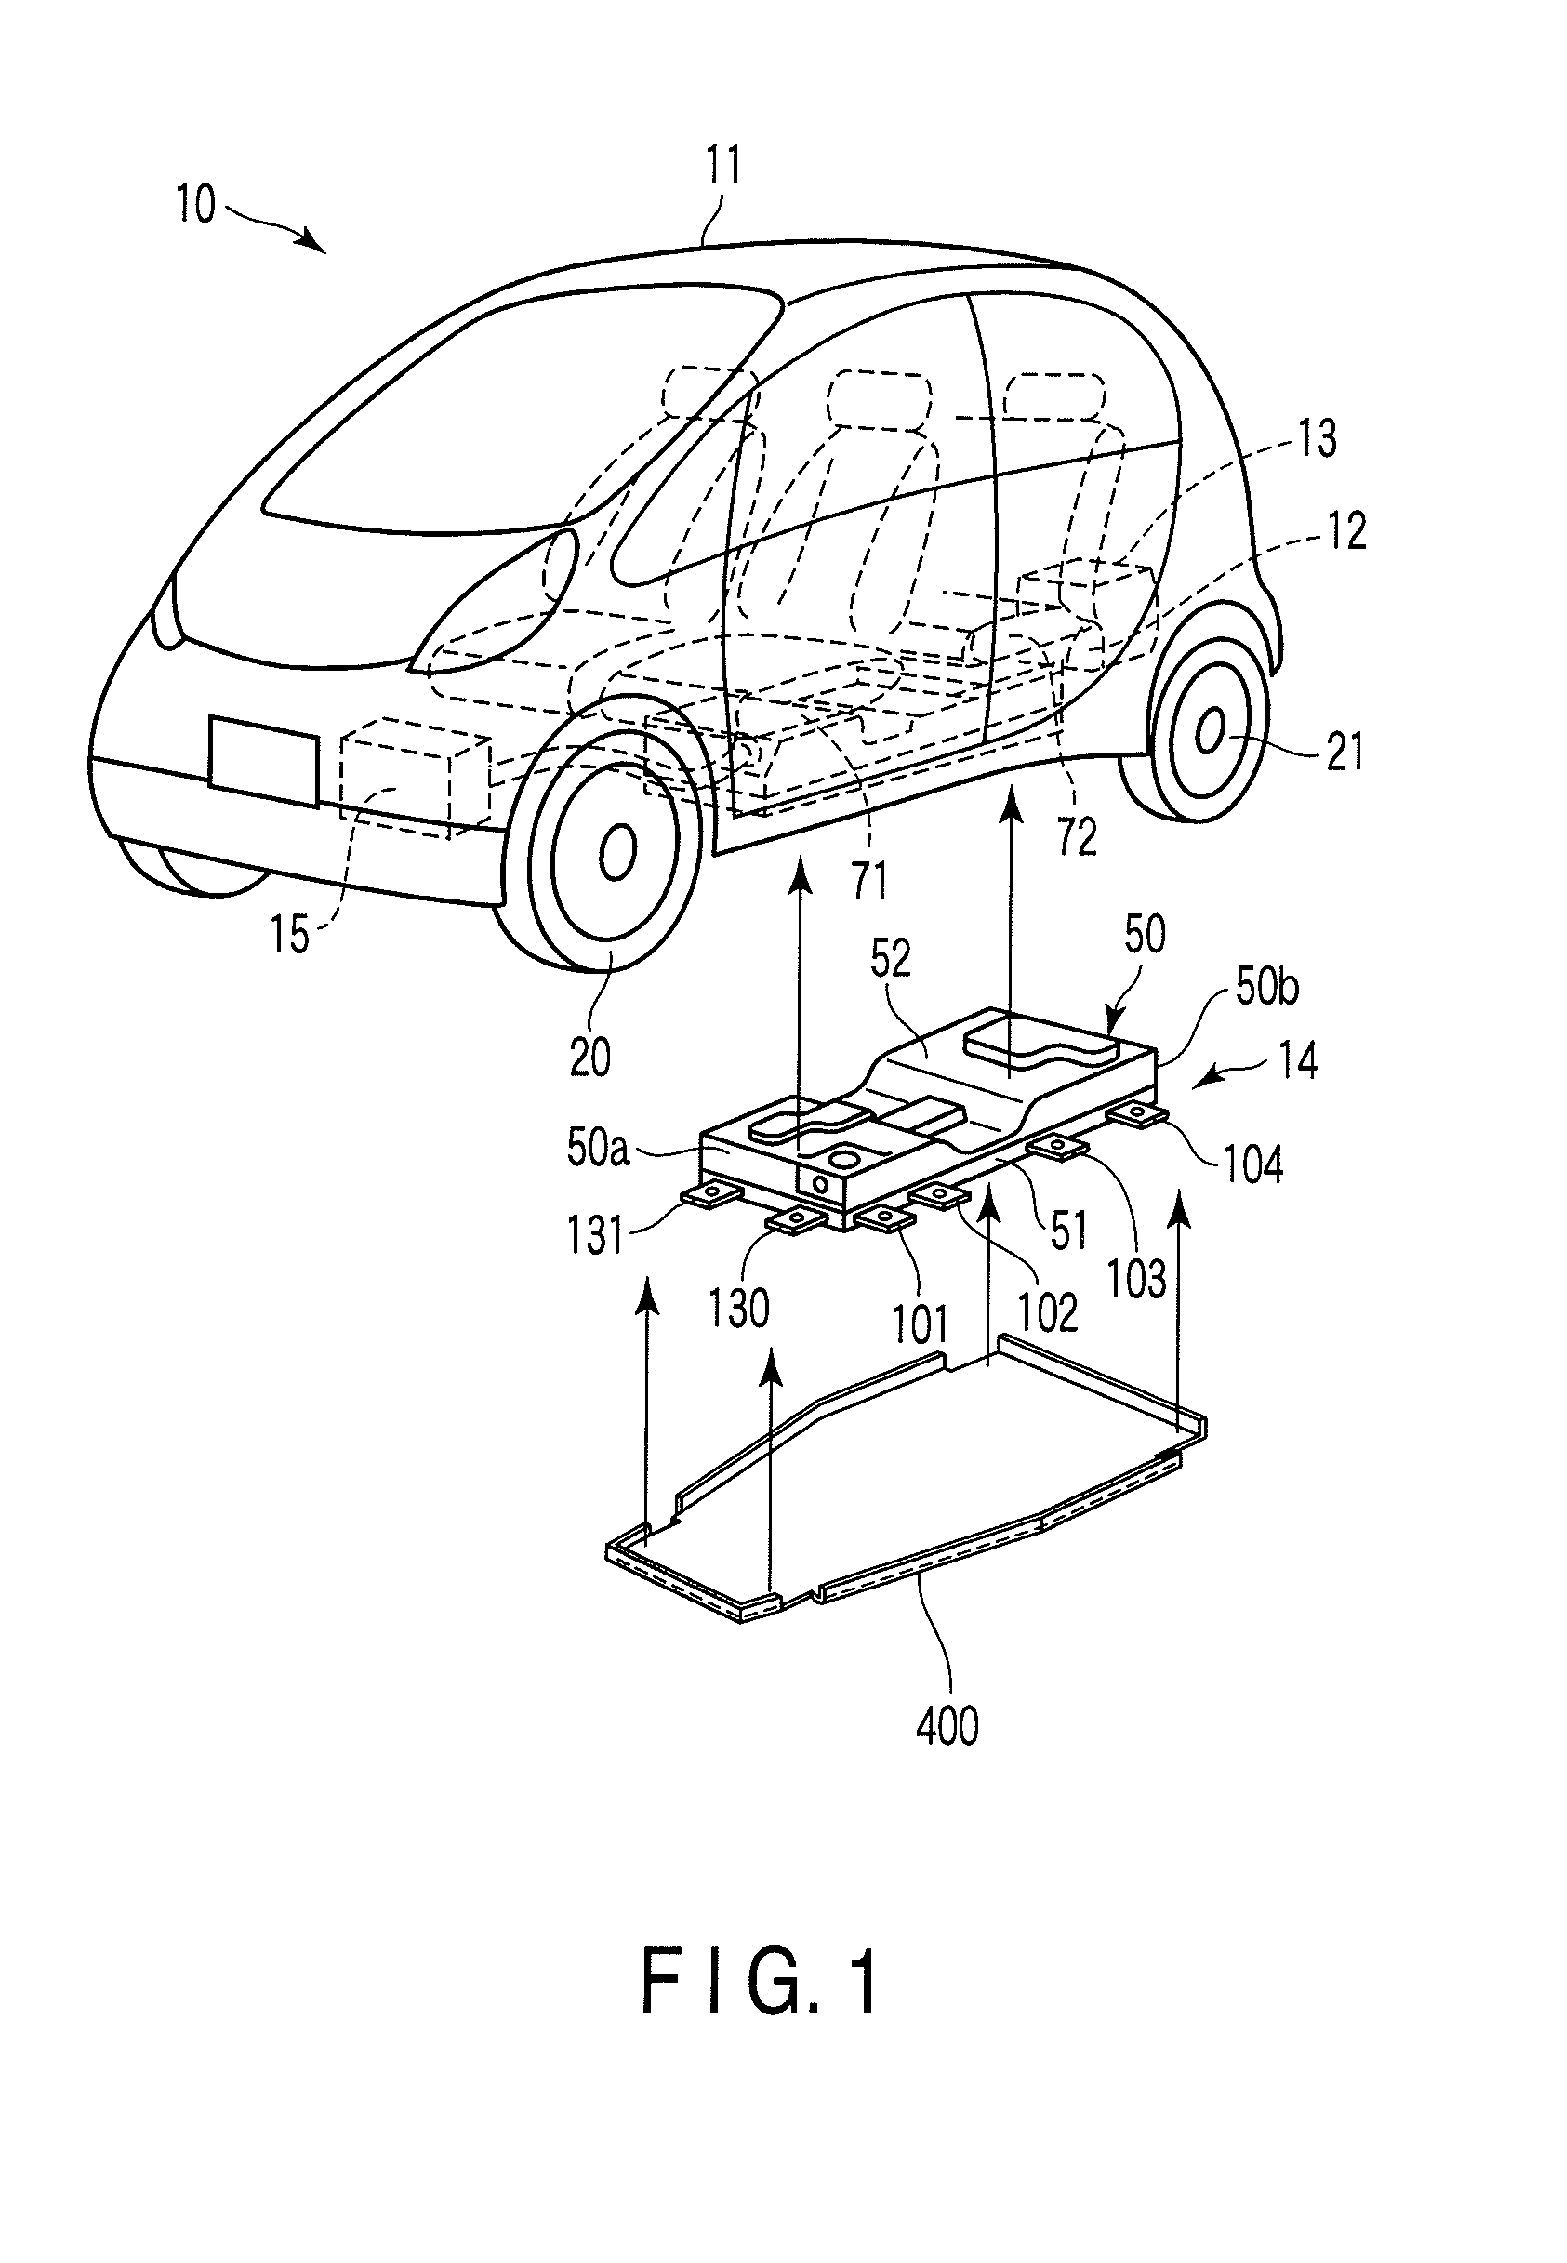 Battery case for electric vehicle